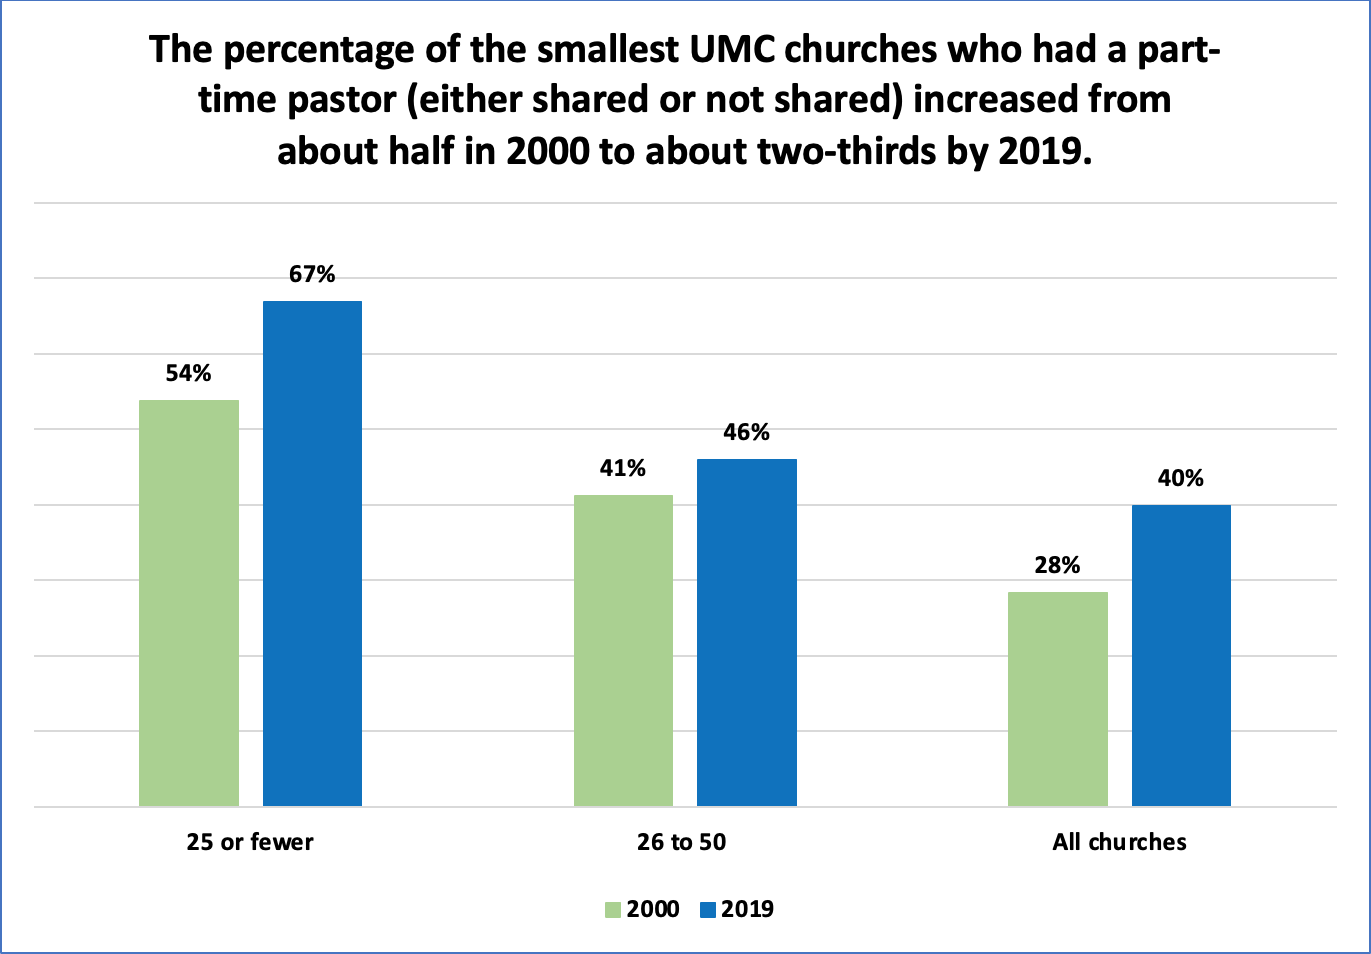 Percentage of smallest UMC churches who had a part-time pastor -- either shared or not shared -- increased from about half in 2000 to about two-thirds by 2019